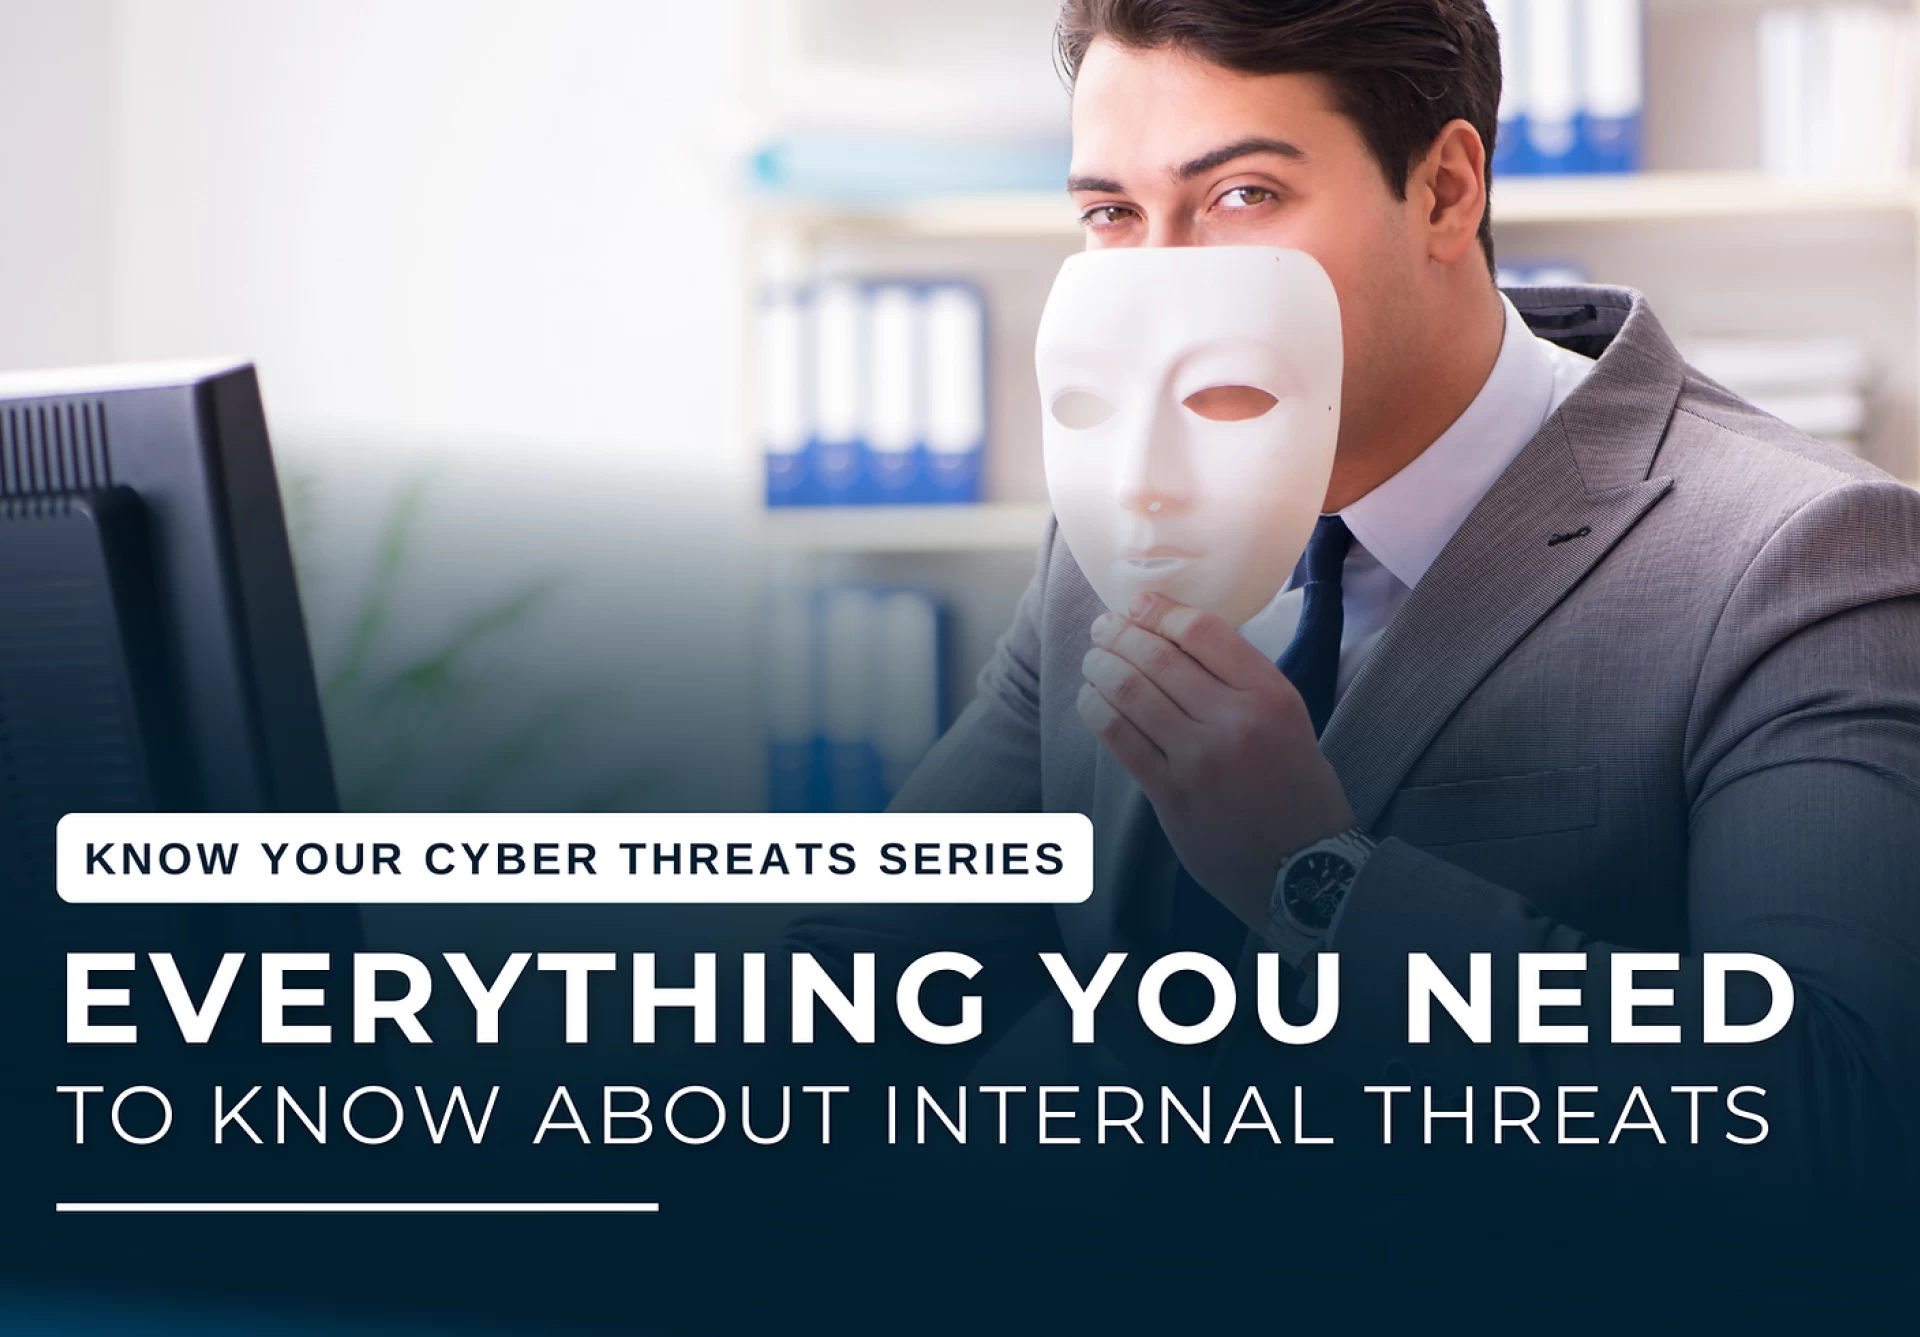 EVERYTHING YOU NEED TO KNOW ABOUT INTERNAL THREATS